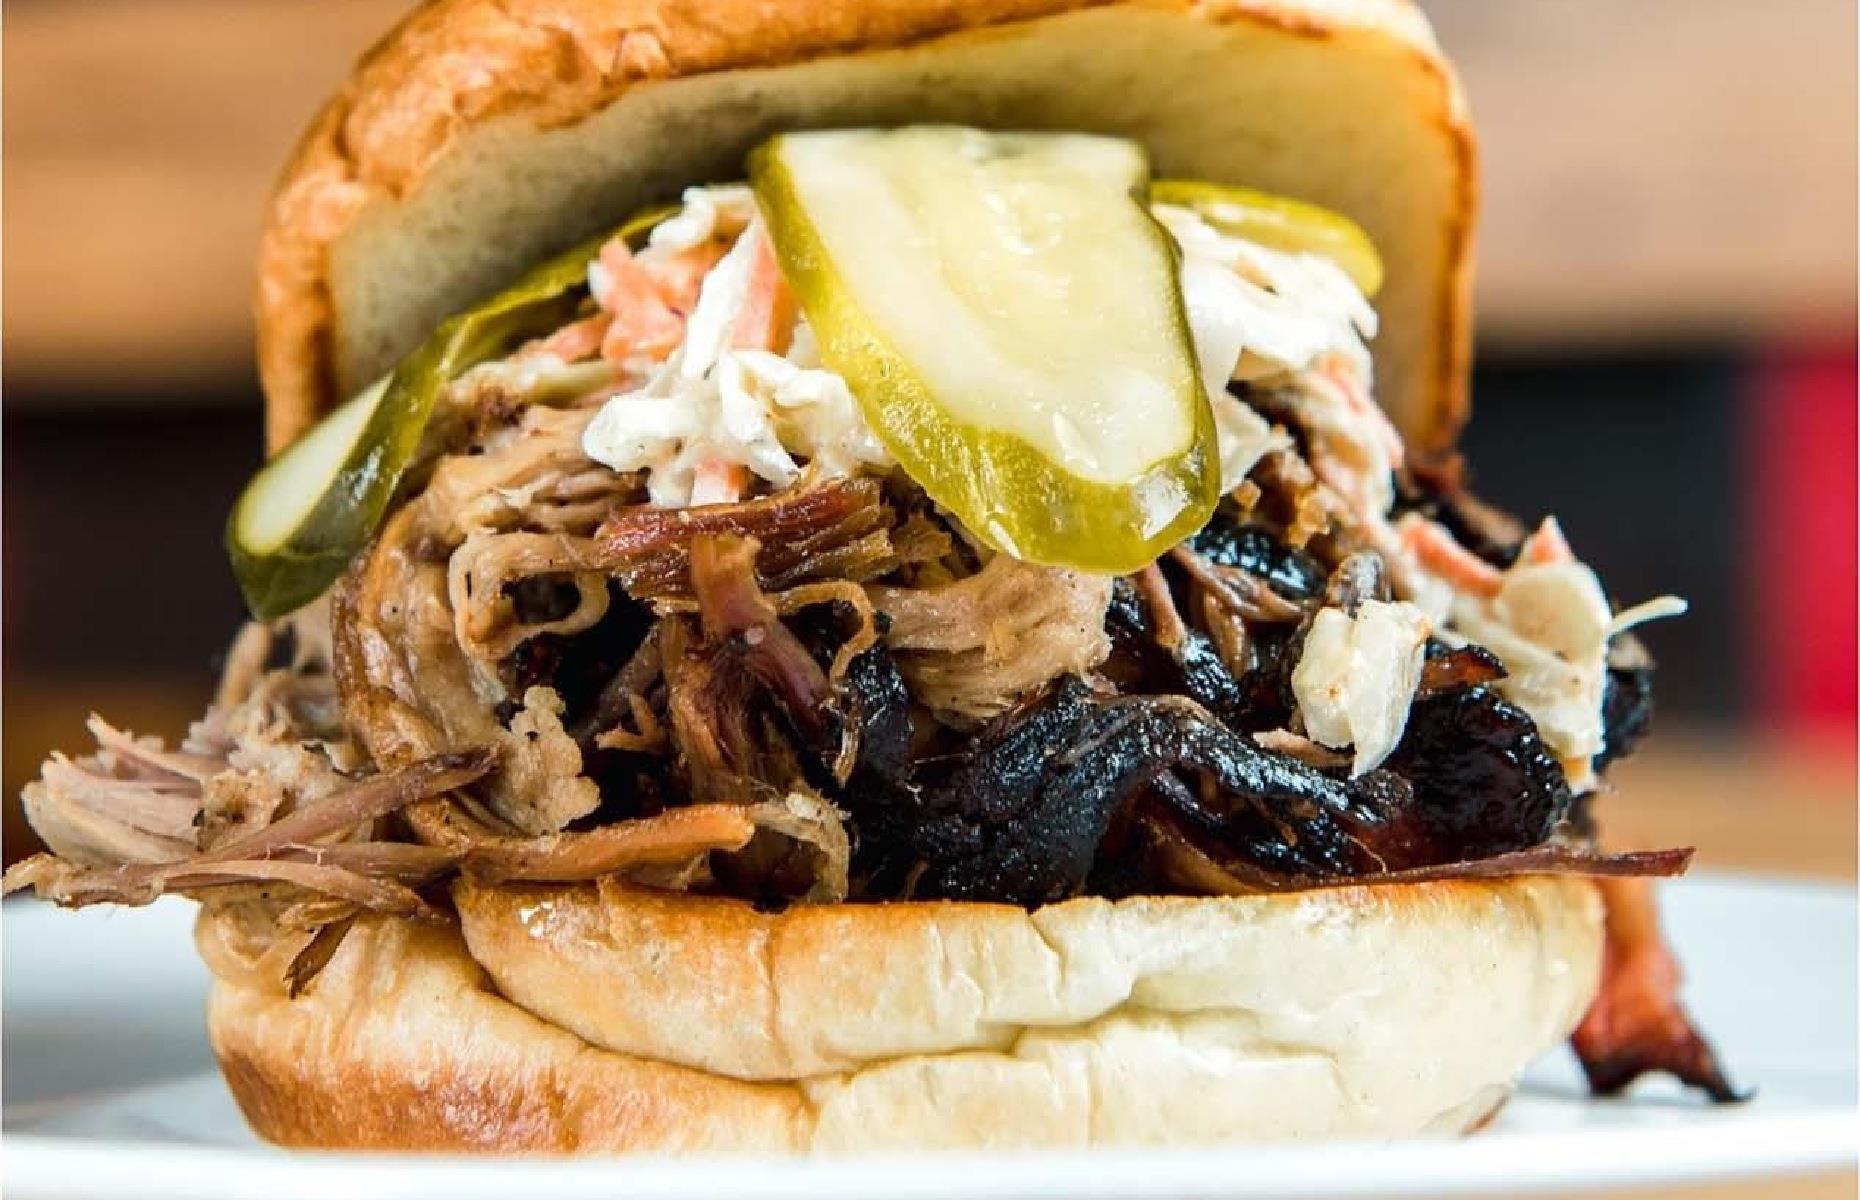 <p>The choice at <a href="https://slowsbarbq.com/">this casual BBQ joint</a> in Detroit is simple. First, pick your meat – pulled pork, beef brisket, or BBQ chicken – then add a side like waffle fries, pit-smoked beans, or mac 'n' cheese, and finish with a hot fudge brownie or carrot cake. There's also an enticing specials menu with bacon fried rice and cheese fries, as well as a <a href="https://www.yelp.com/biz/slows-bar-bq-detroit">good selection of burgers</a> – try the signature Reason burger with smoked pulled pork, coleslaw, and dill pickles.</p>